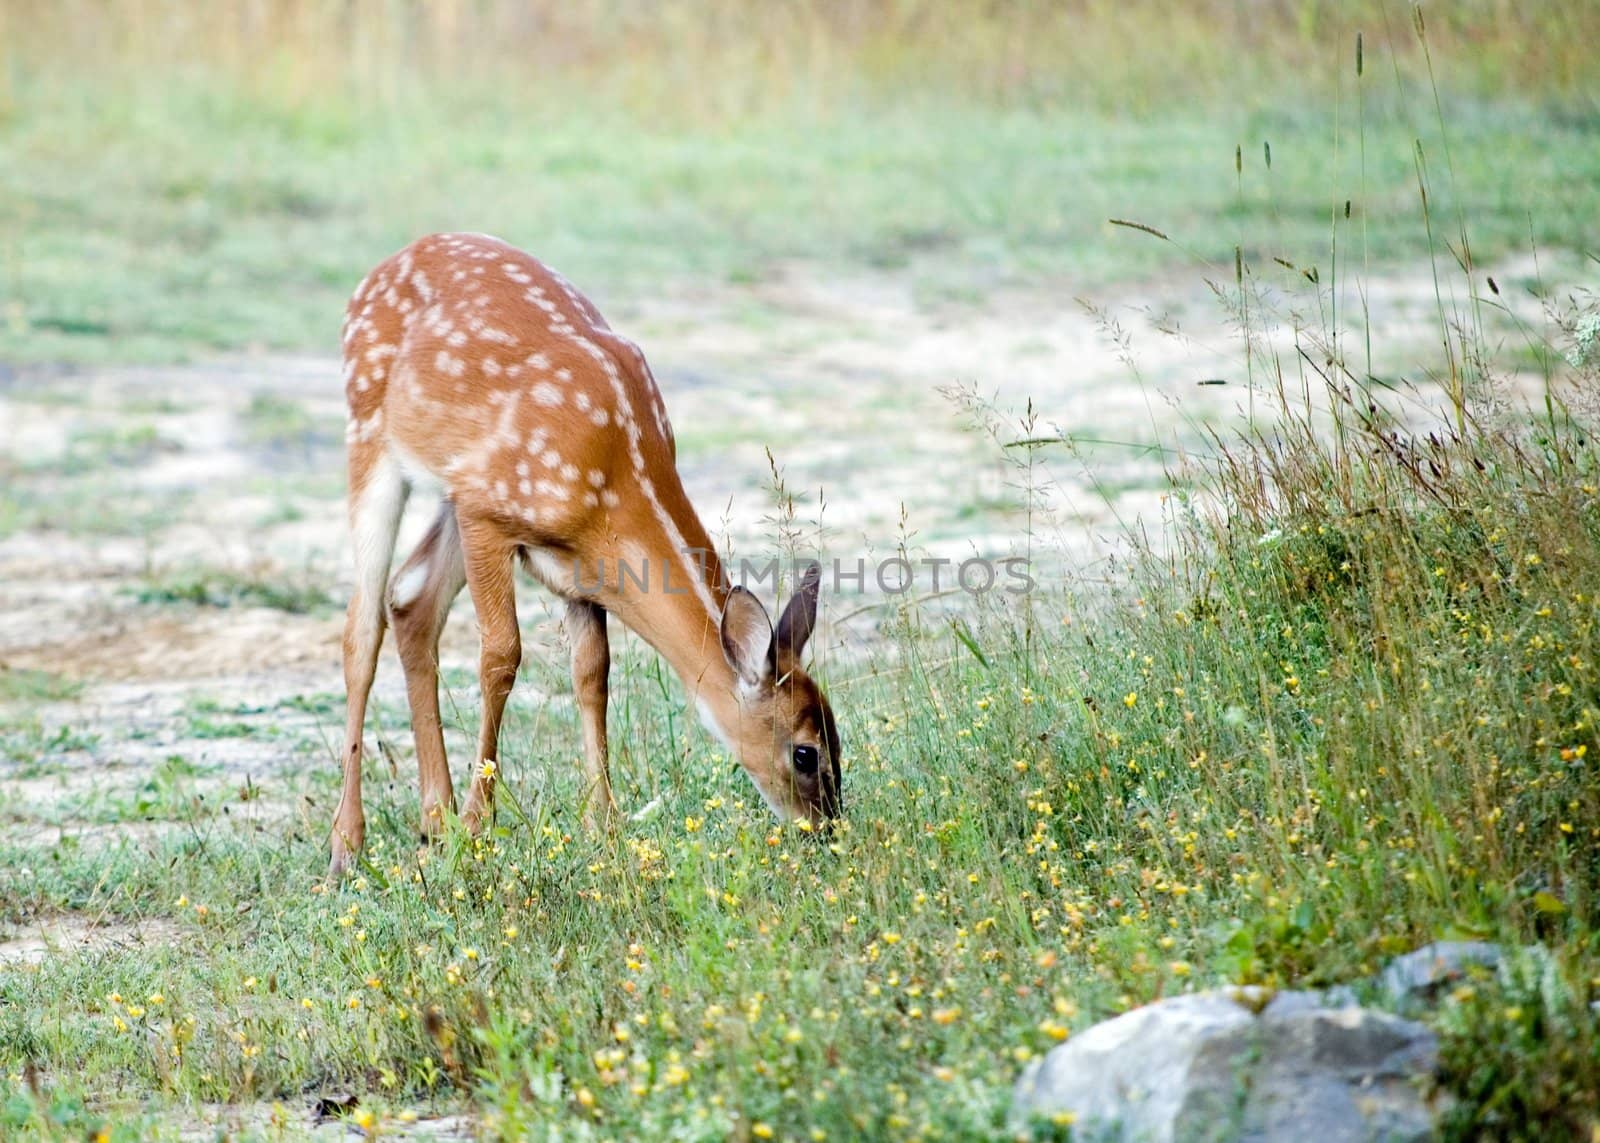 A whitetail deer fawn browsing in a field.